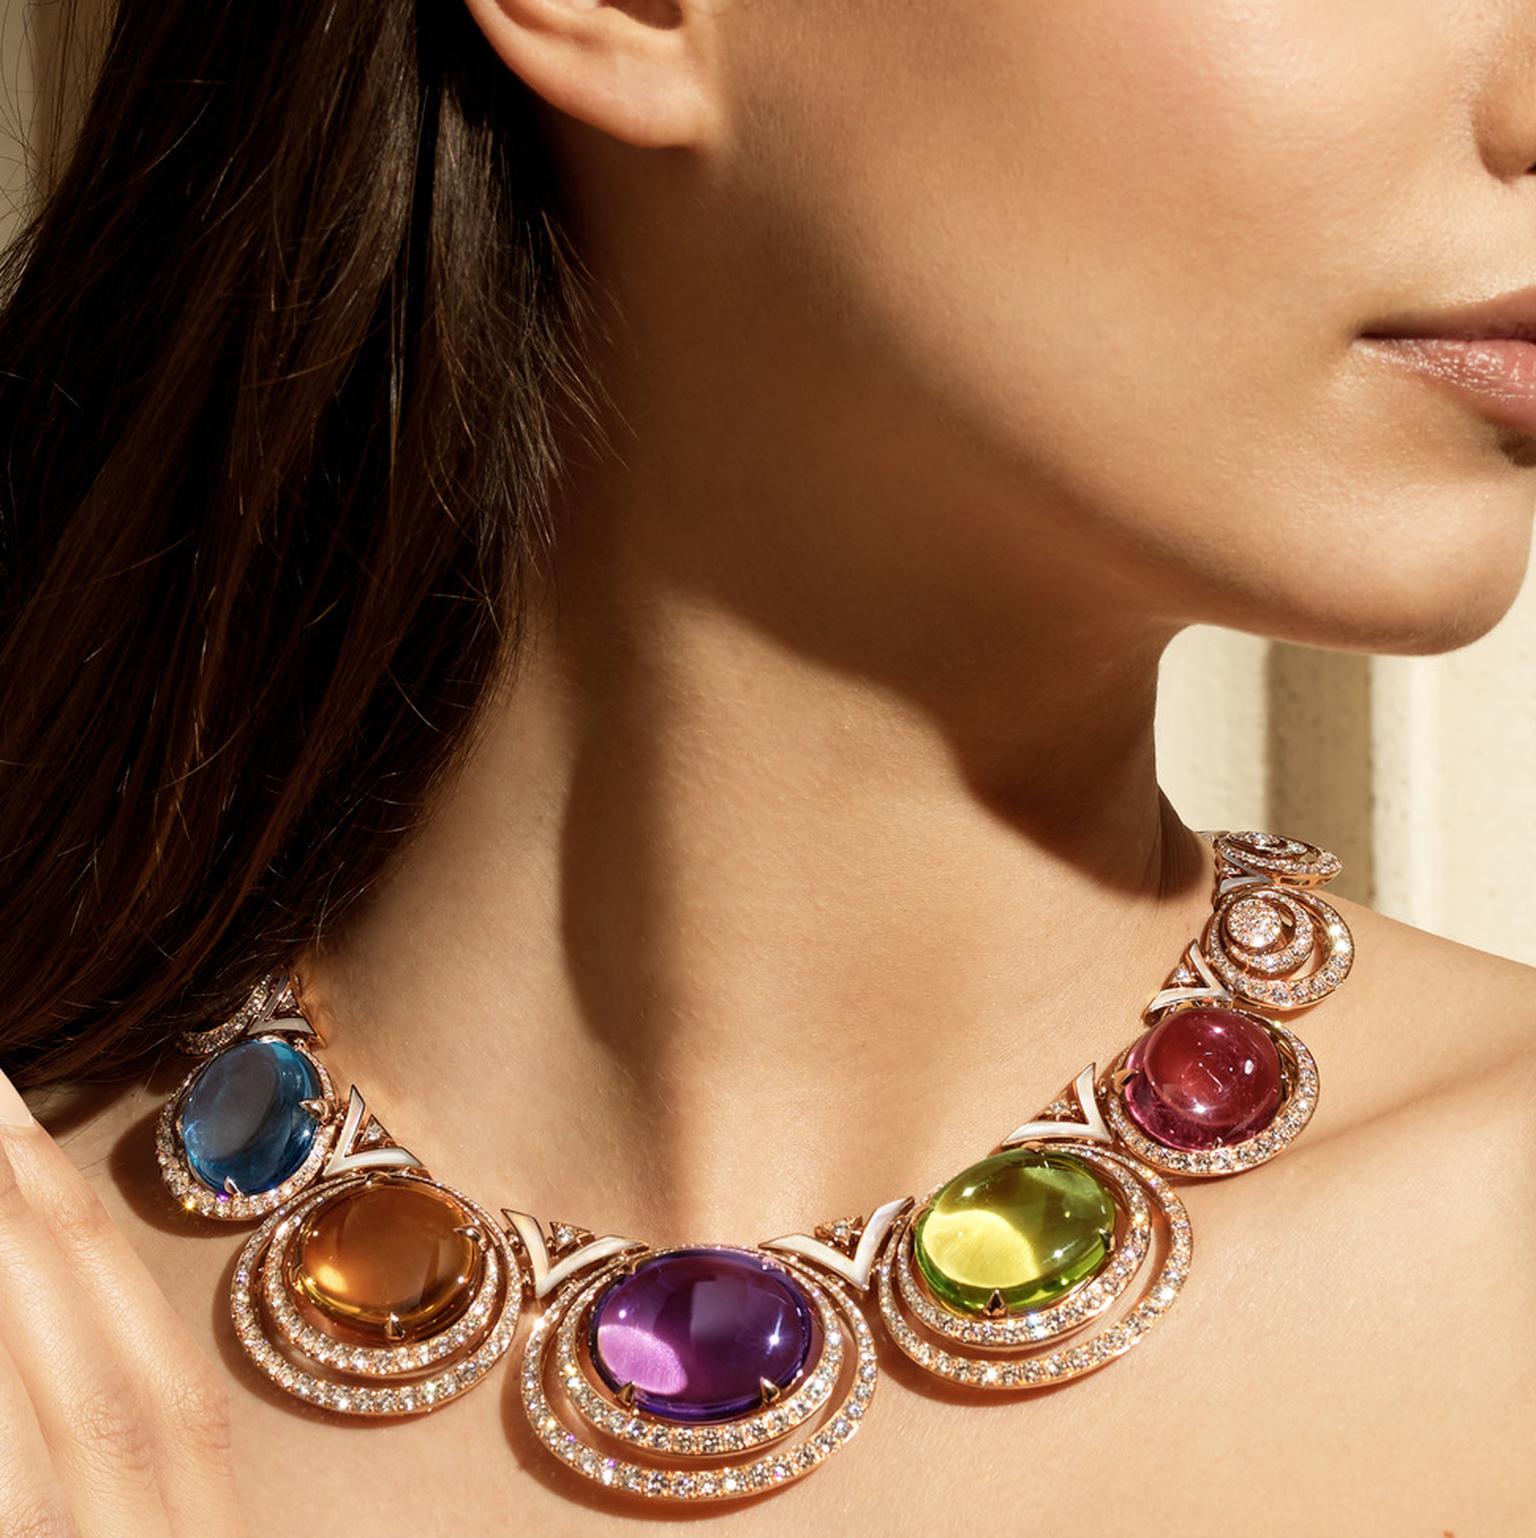 Why Bulgari's Magnifica high jewellery is amongst the best in the